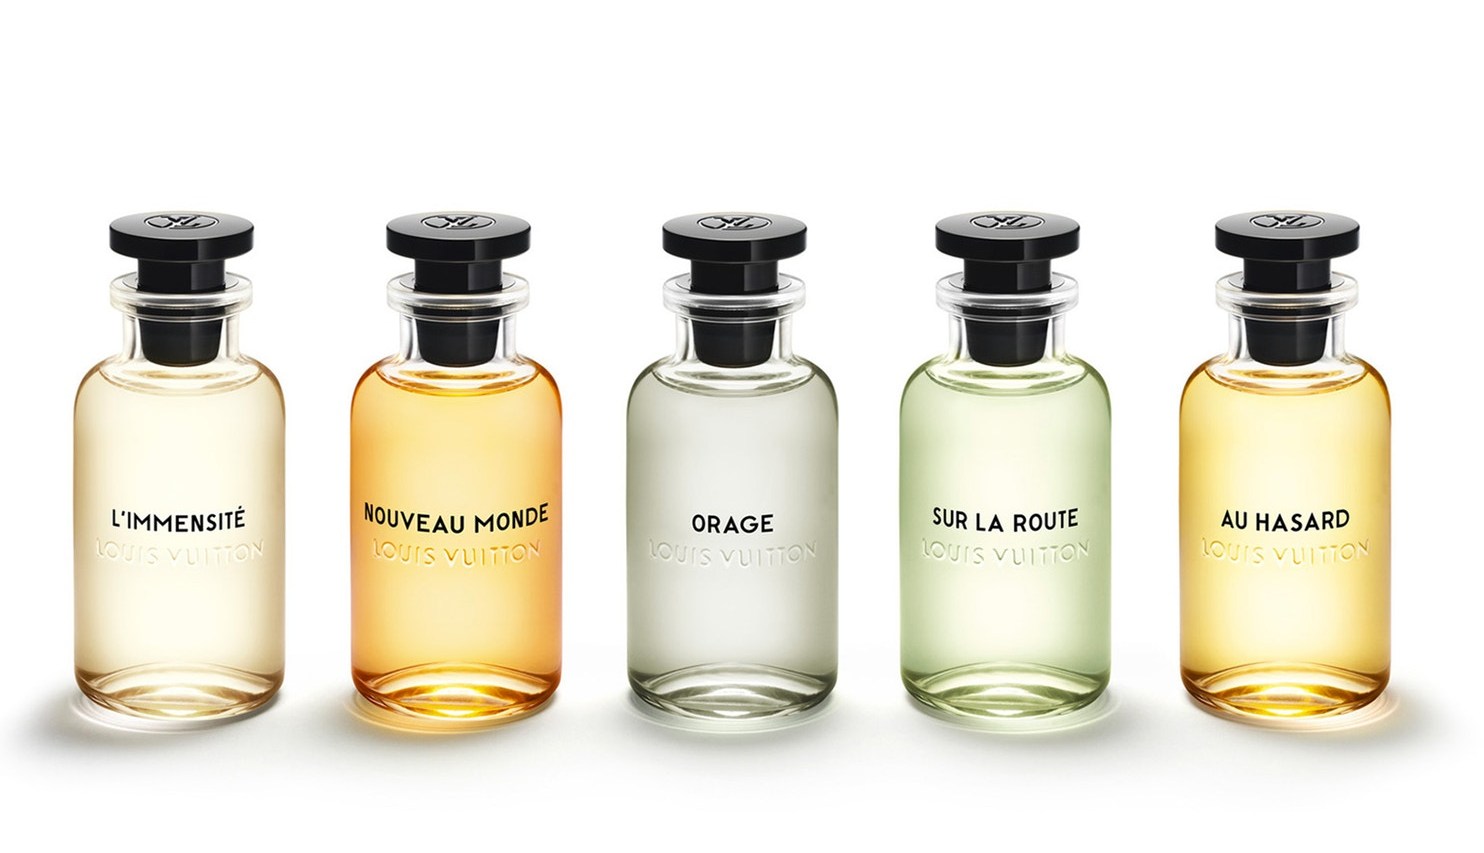 Louis Vuitton captures the scents of destinations far and wide in their